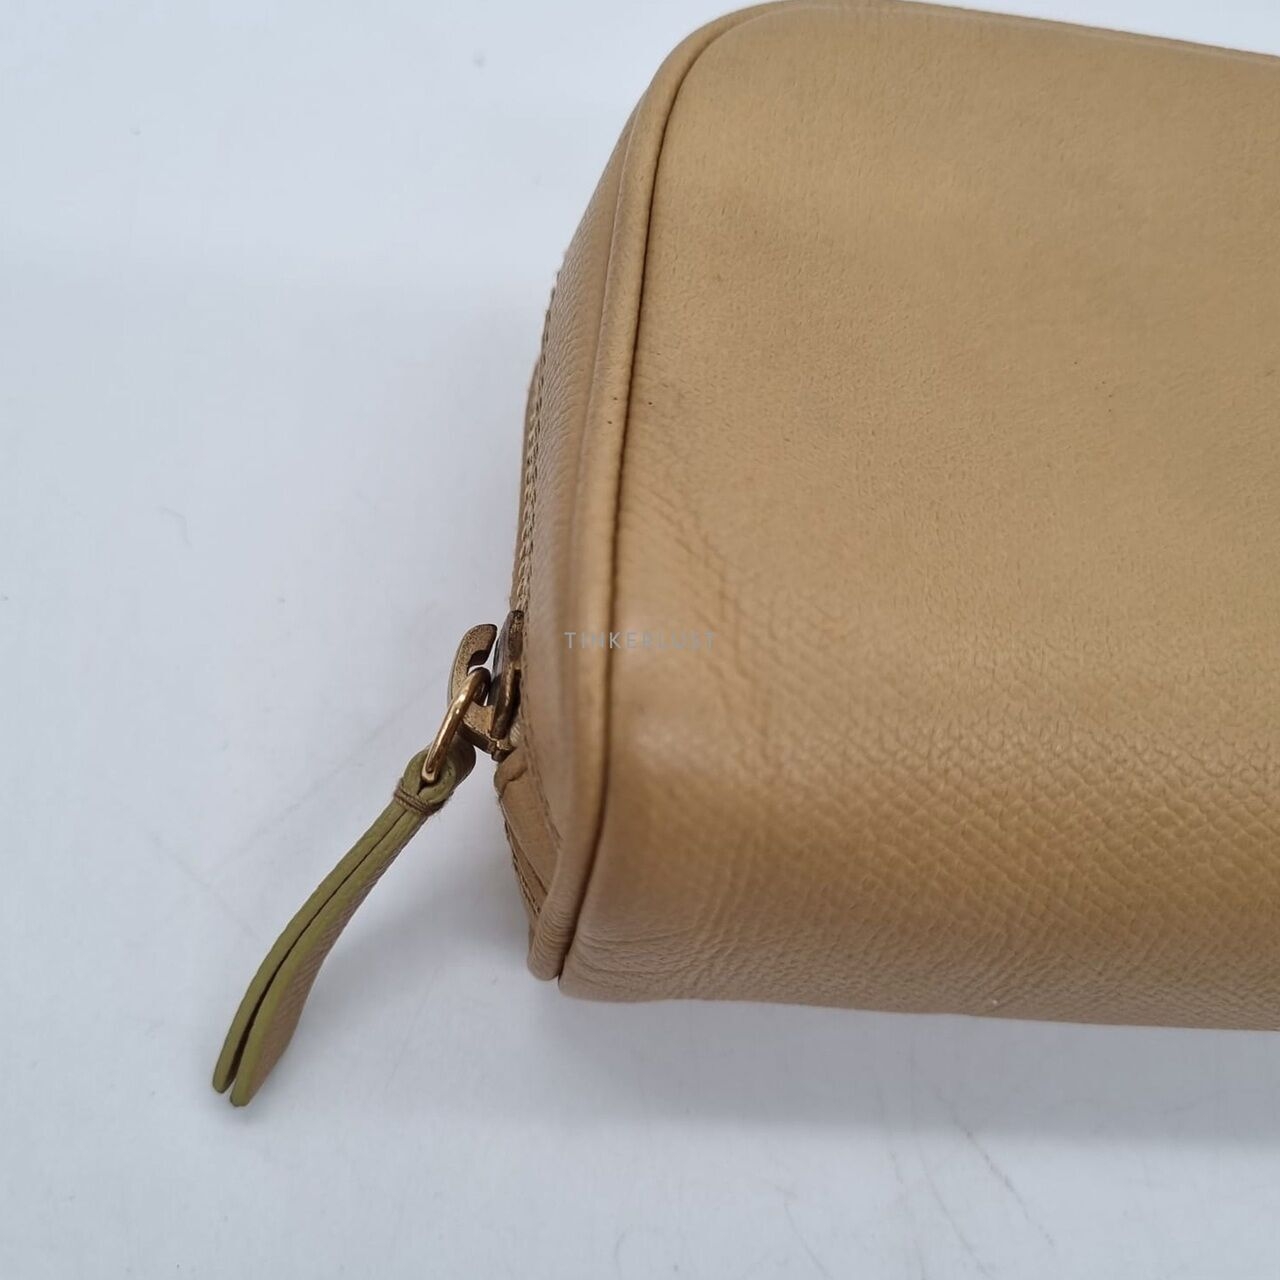 Chanel Beige Leather #10 GHW Pouch